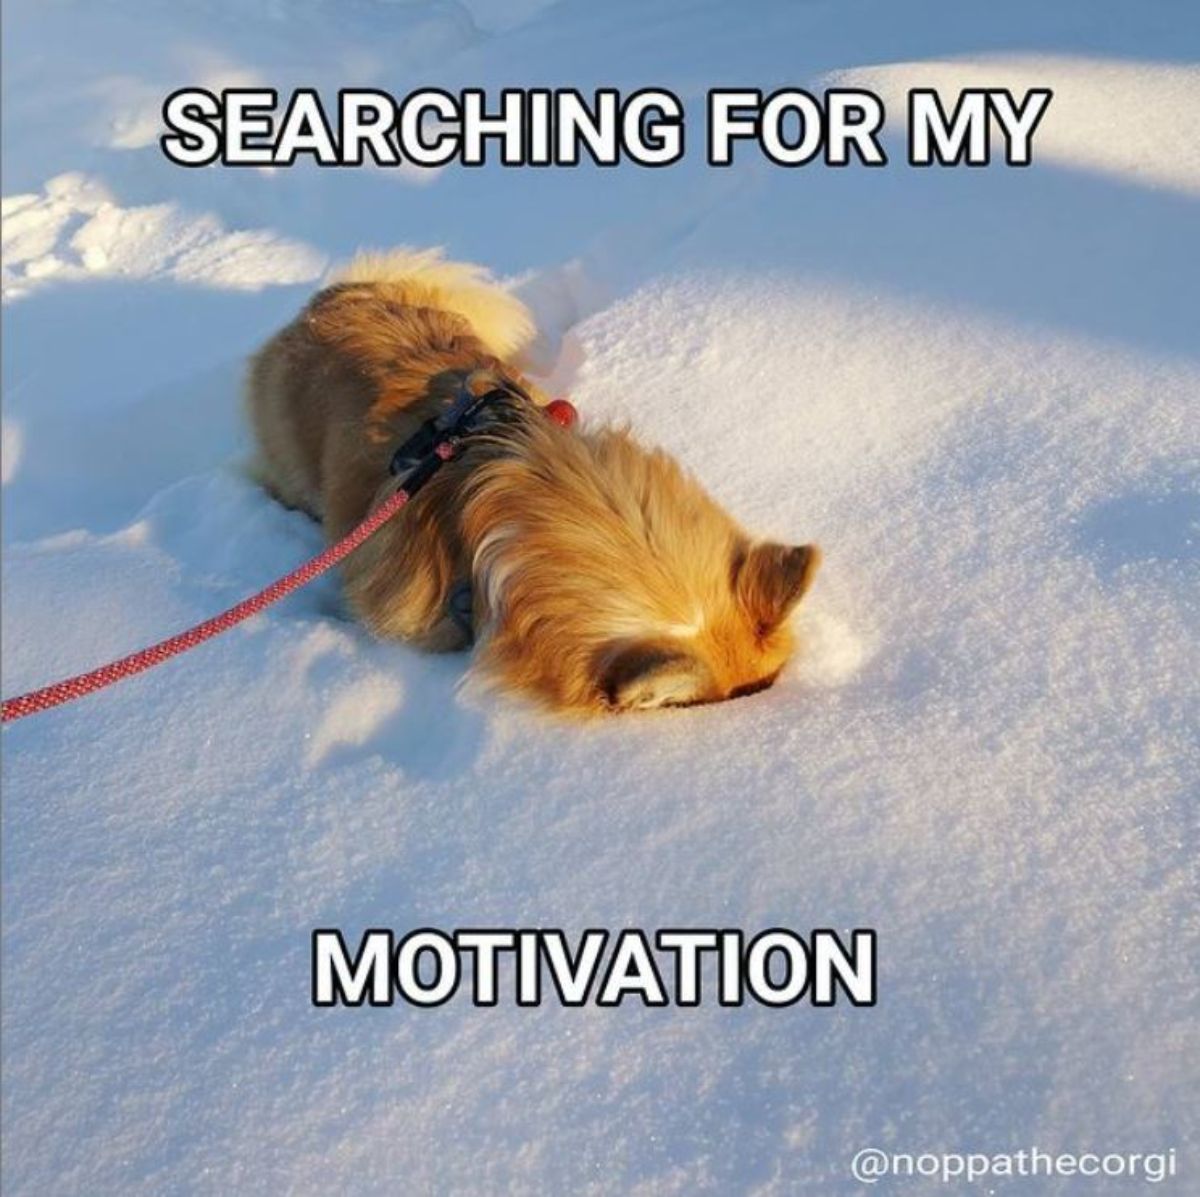 corgi dog with its face buried in snow and a text "Searching for my motivation"